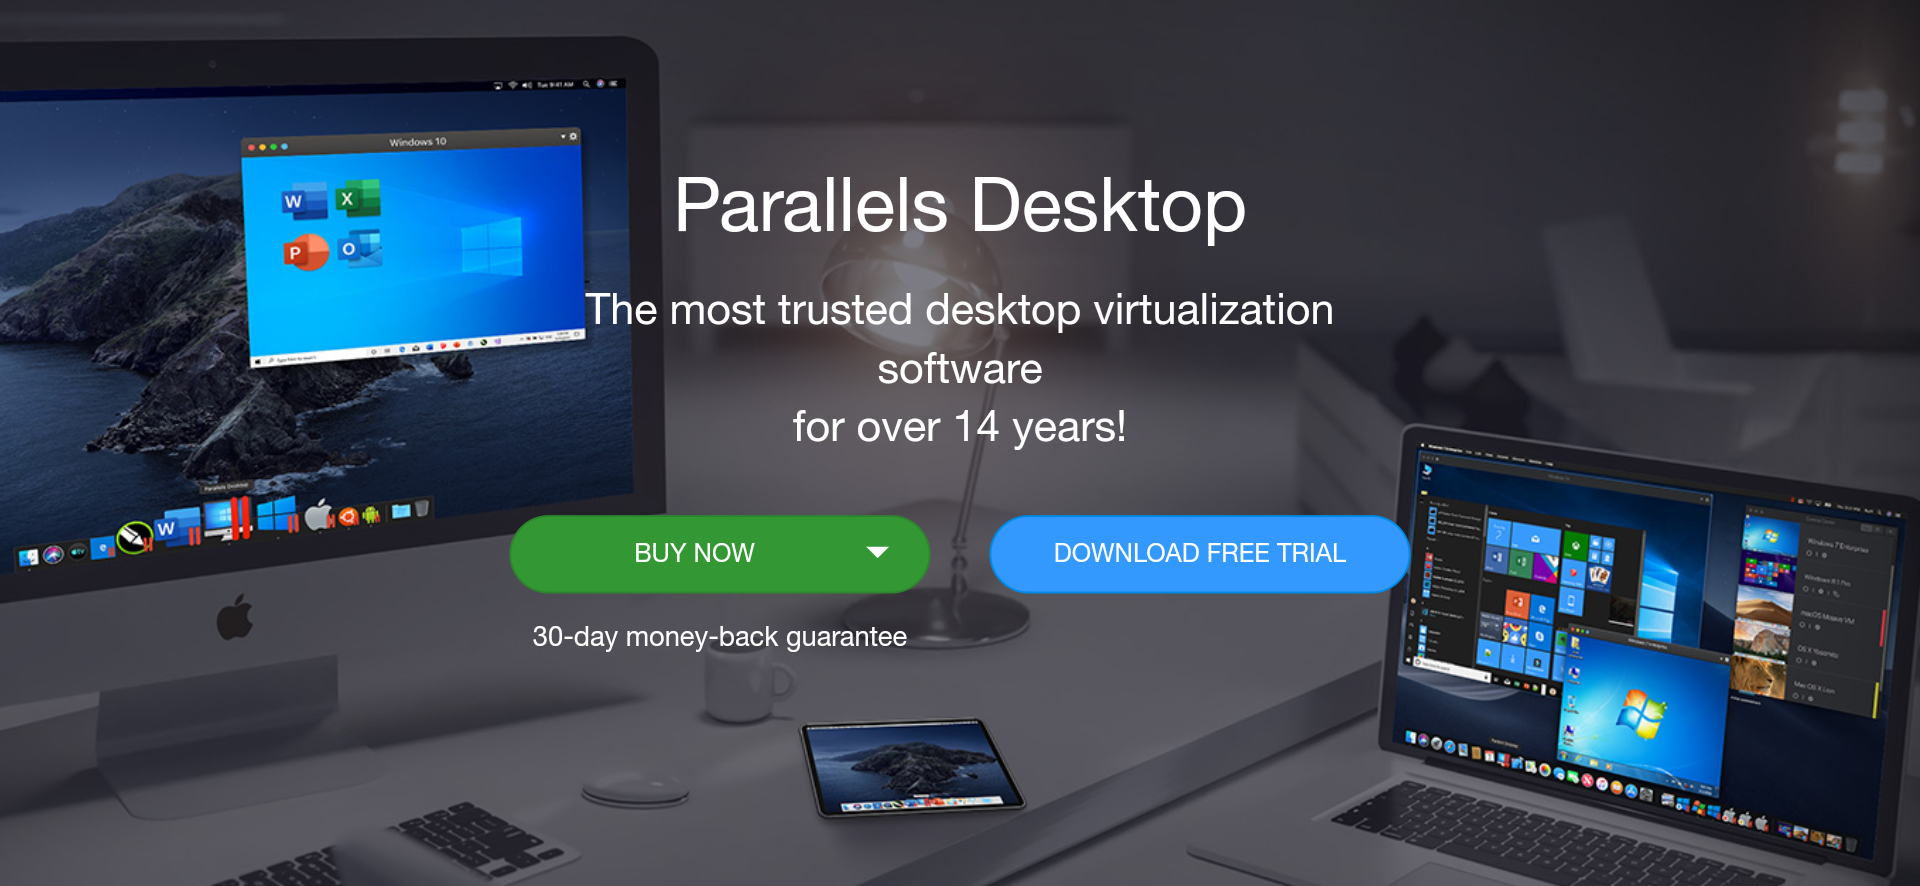 cost of windows 10 for parralels for mac